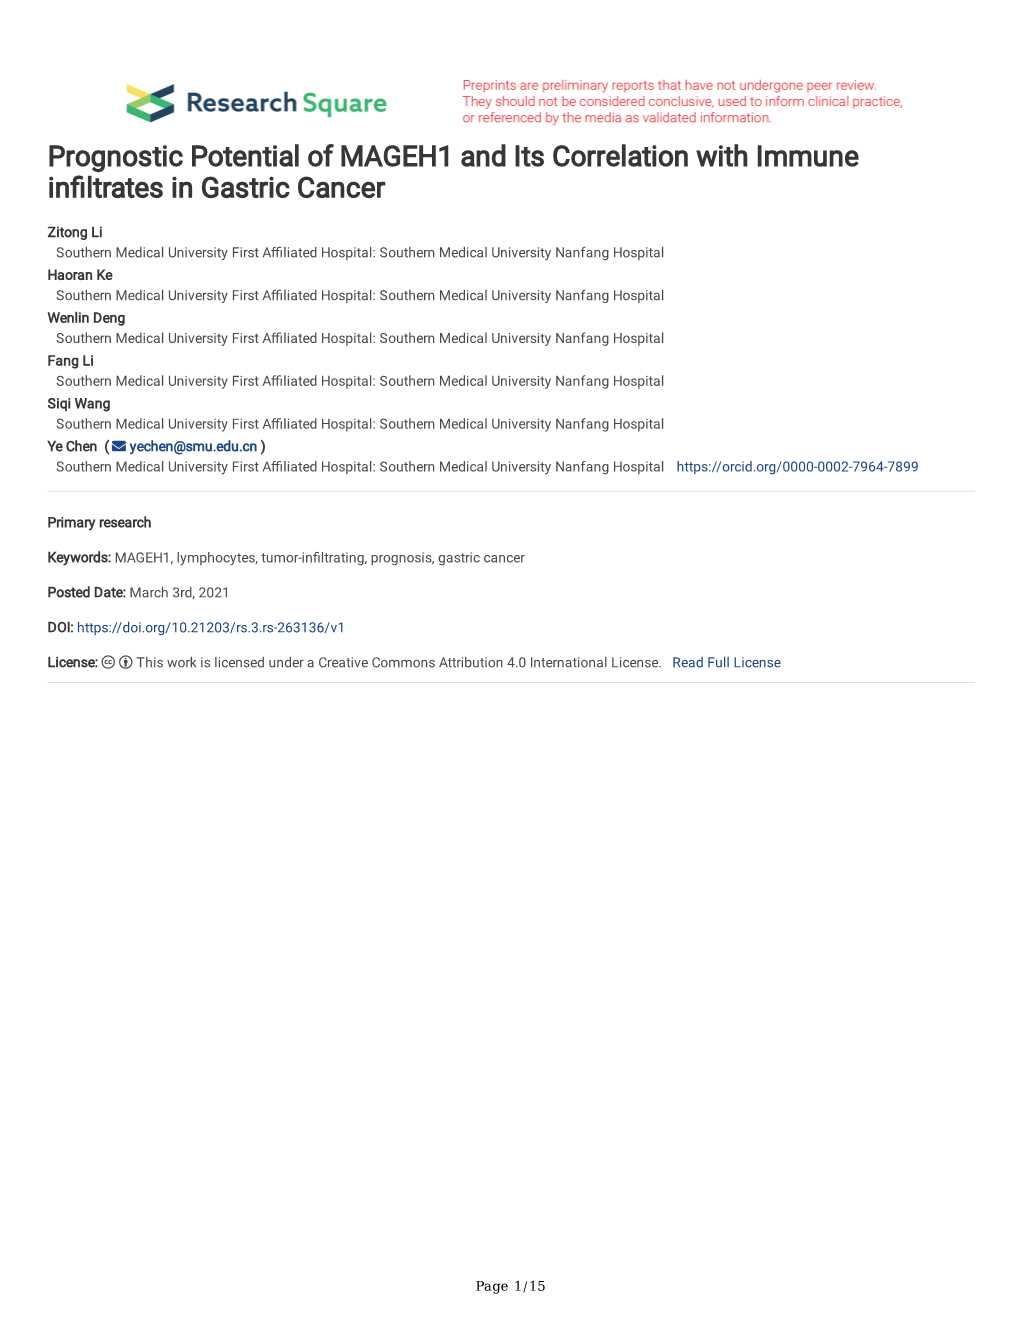 Prognostic Potential of MAGEH1 and Its Correlation with Immune Infltrates in Gastric Cancer